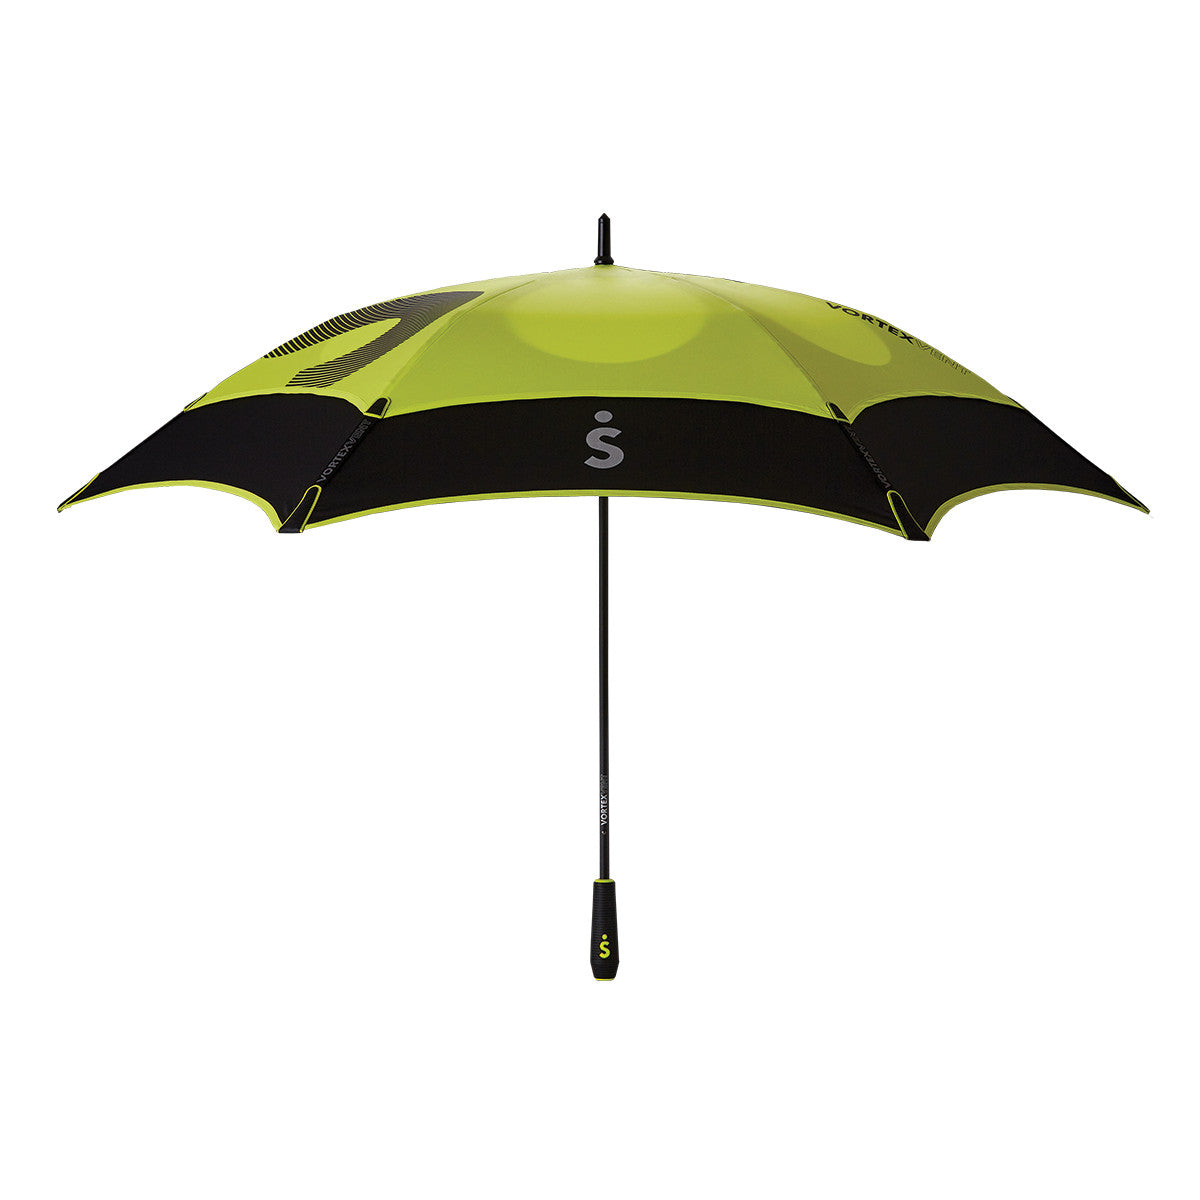 bright lime green and black vented double canopy wind-resistant three person golf umbrella with fiberglass frame and rubber grip, viewed straight on